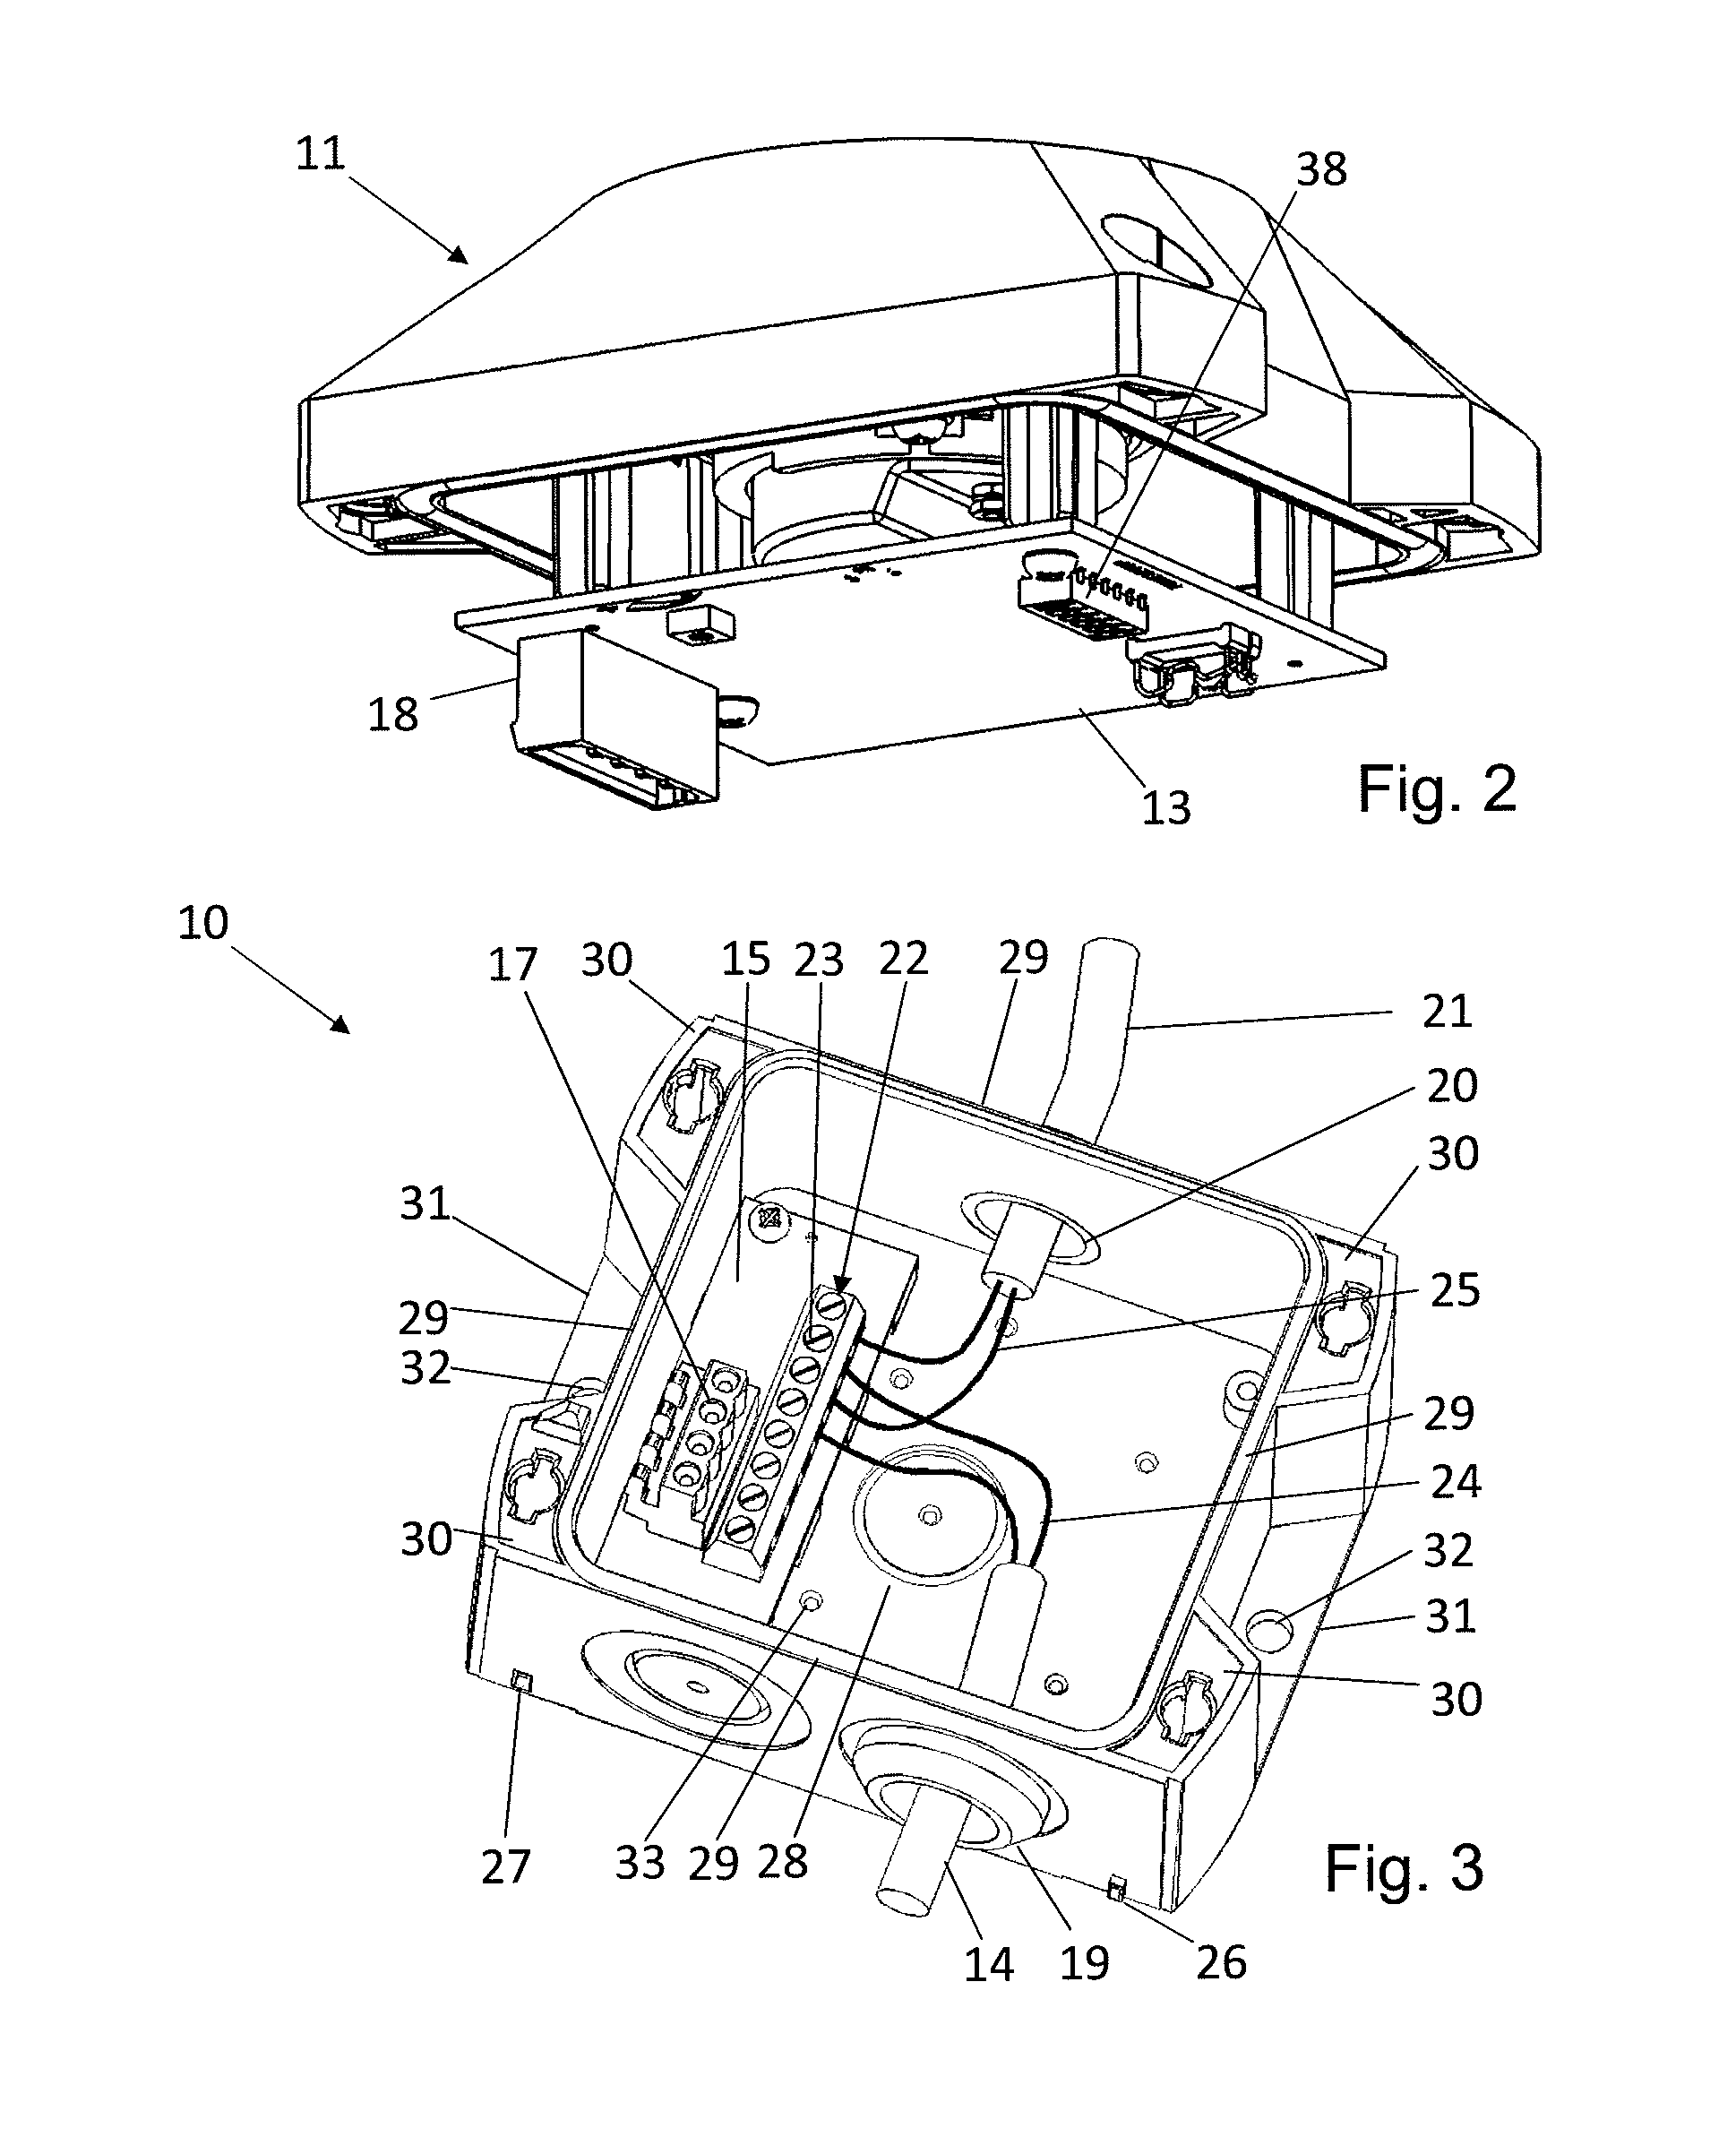 Signaling device for emitting an acoustic and/or visual signal